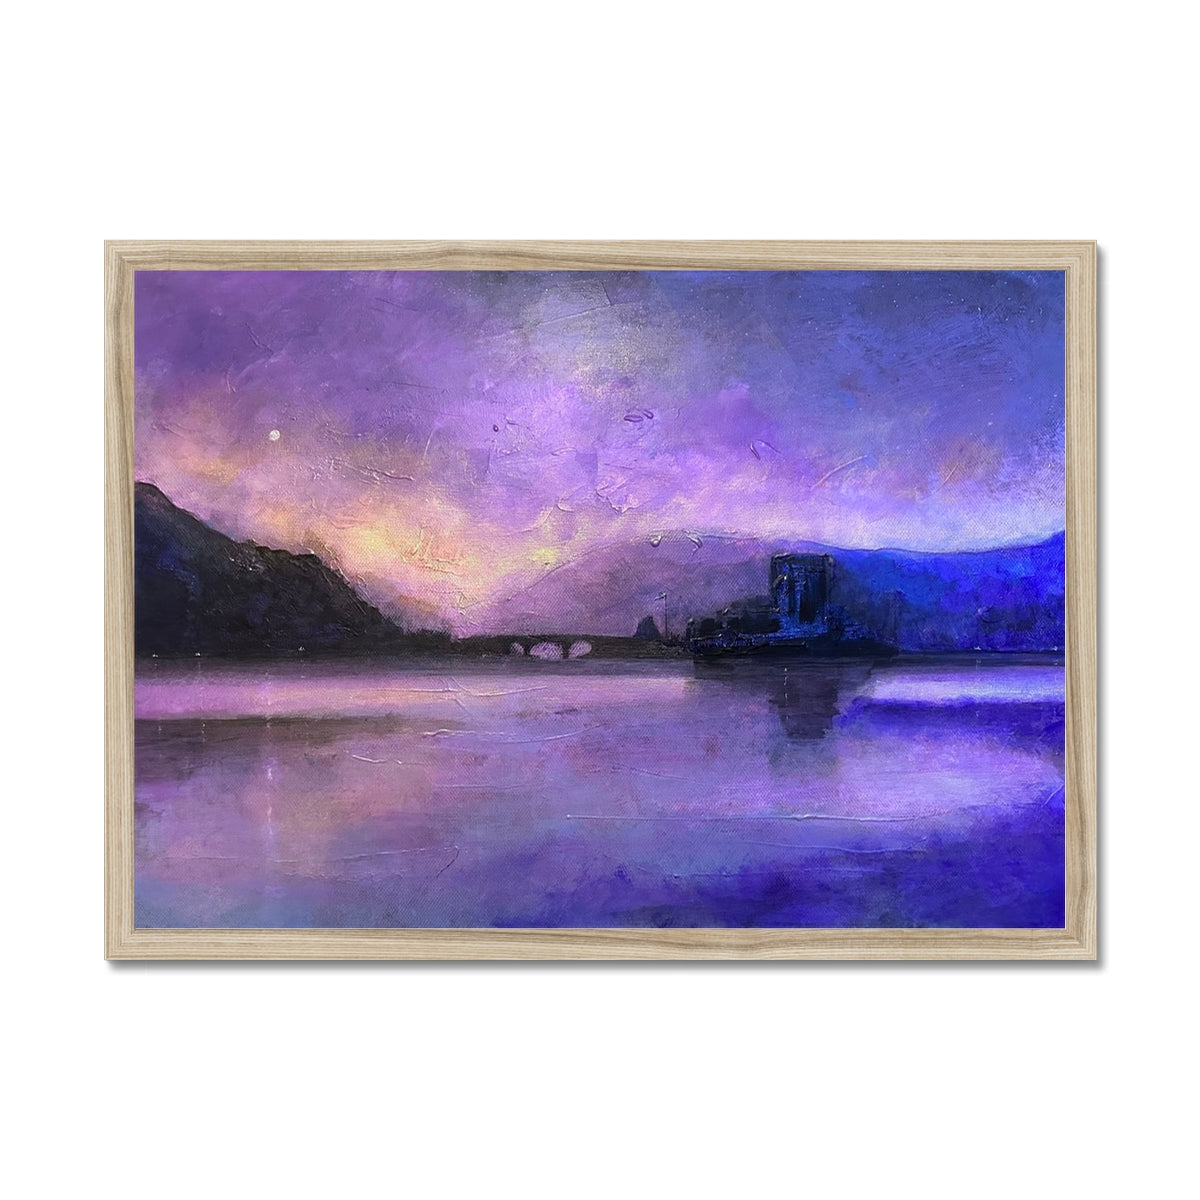 Eilean Donan Castle Moonset Painting | Framed Prints From Scotland-Framed Prints-Historic & Iconic Scotland Art Gallery-A2 Landscape-Natural Frame-Paintings, Prints, Homeware, Art Gifts From Scotland By Scottish Artist Kevin Hunter